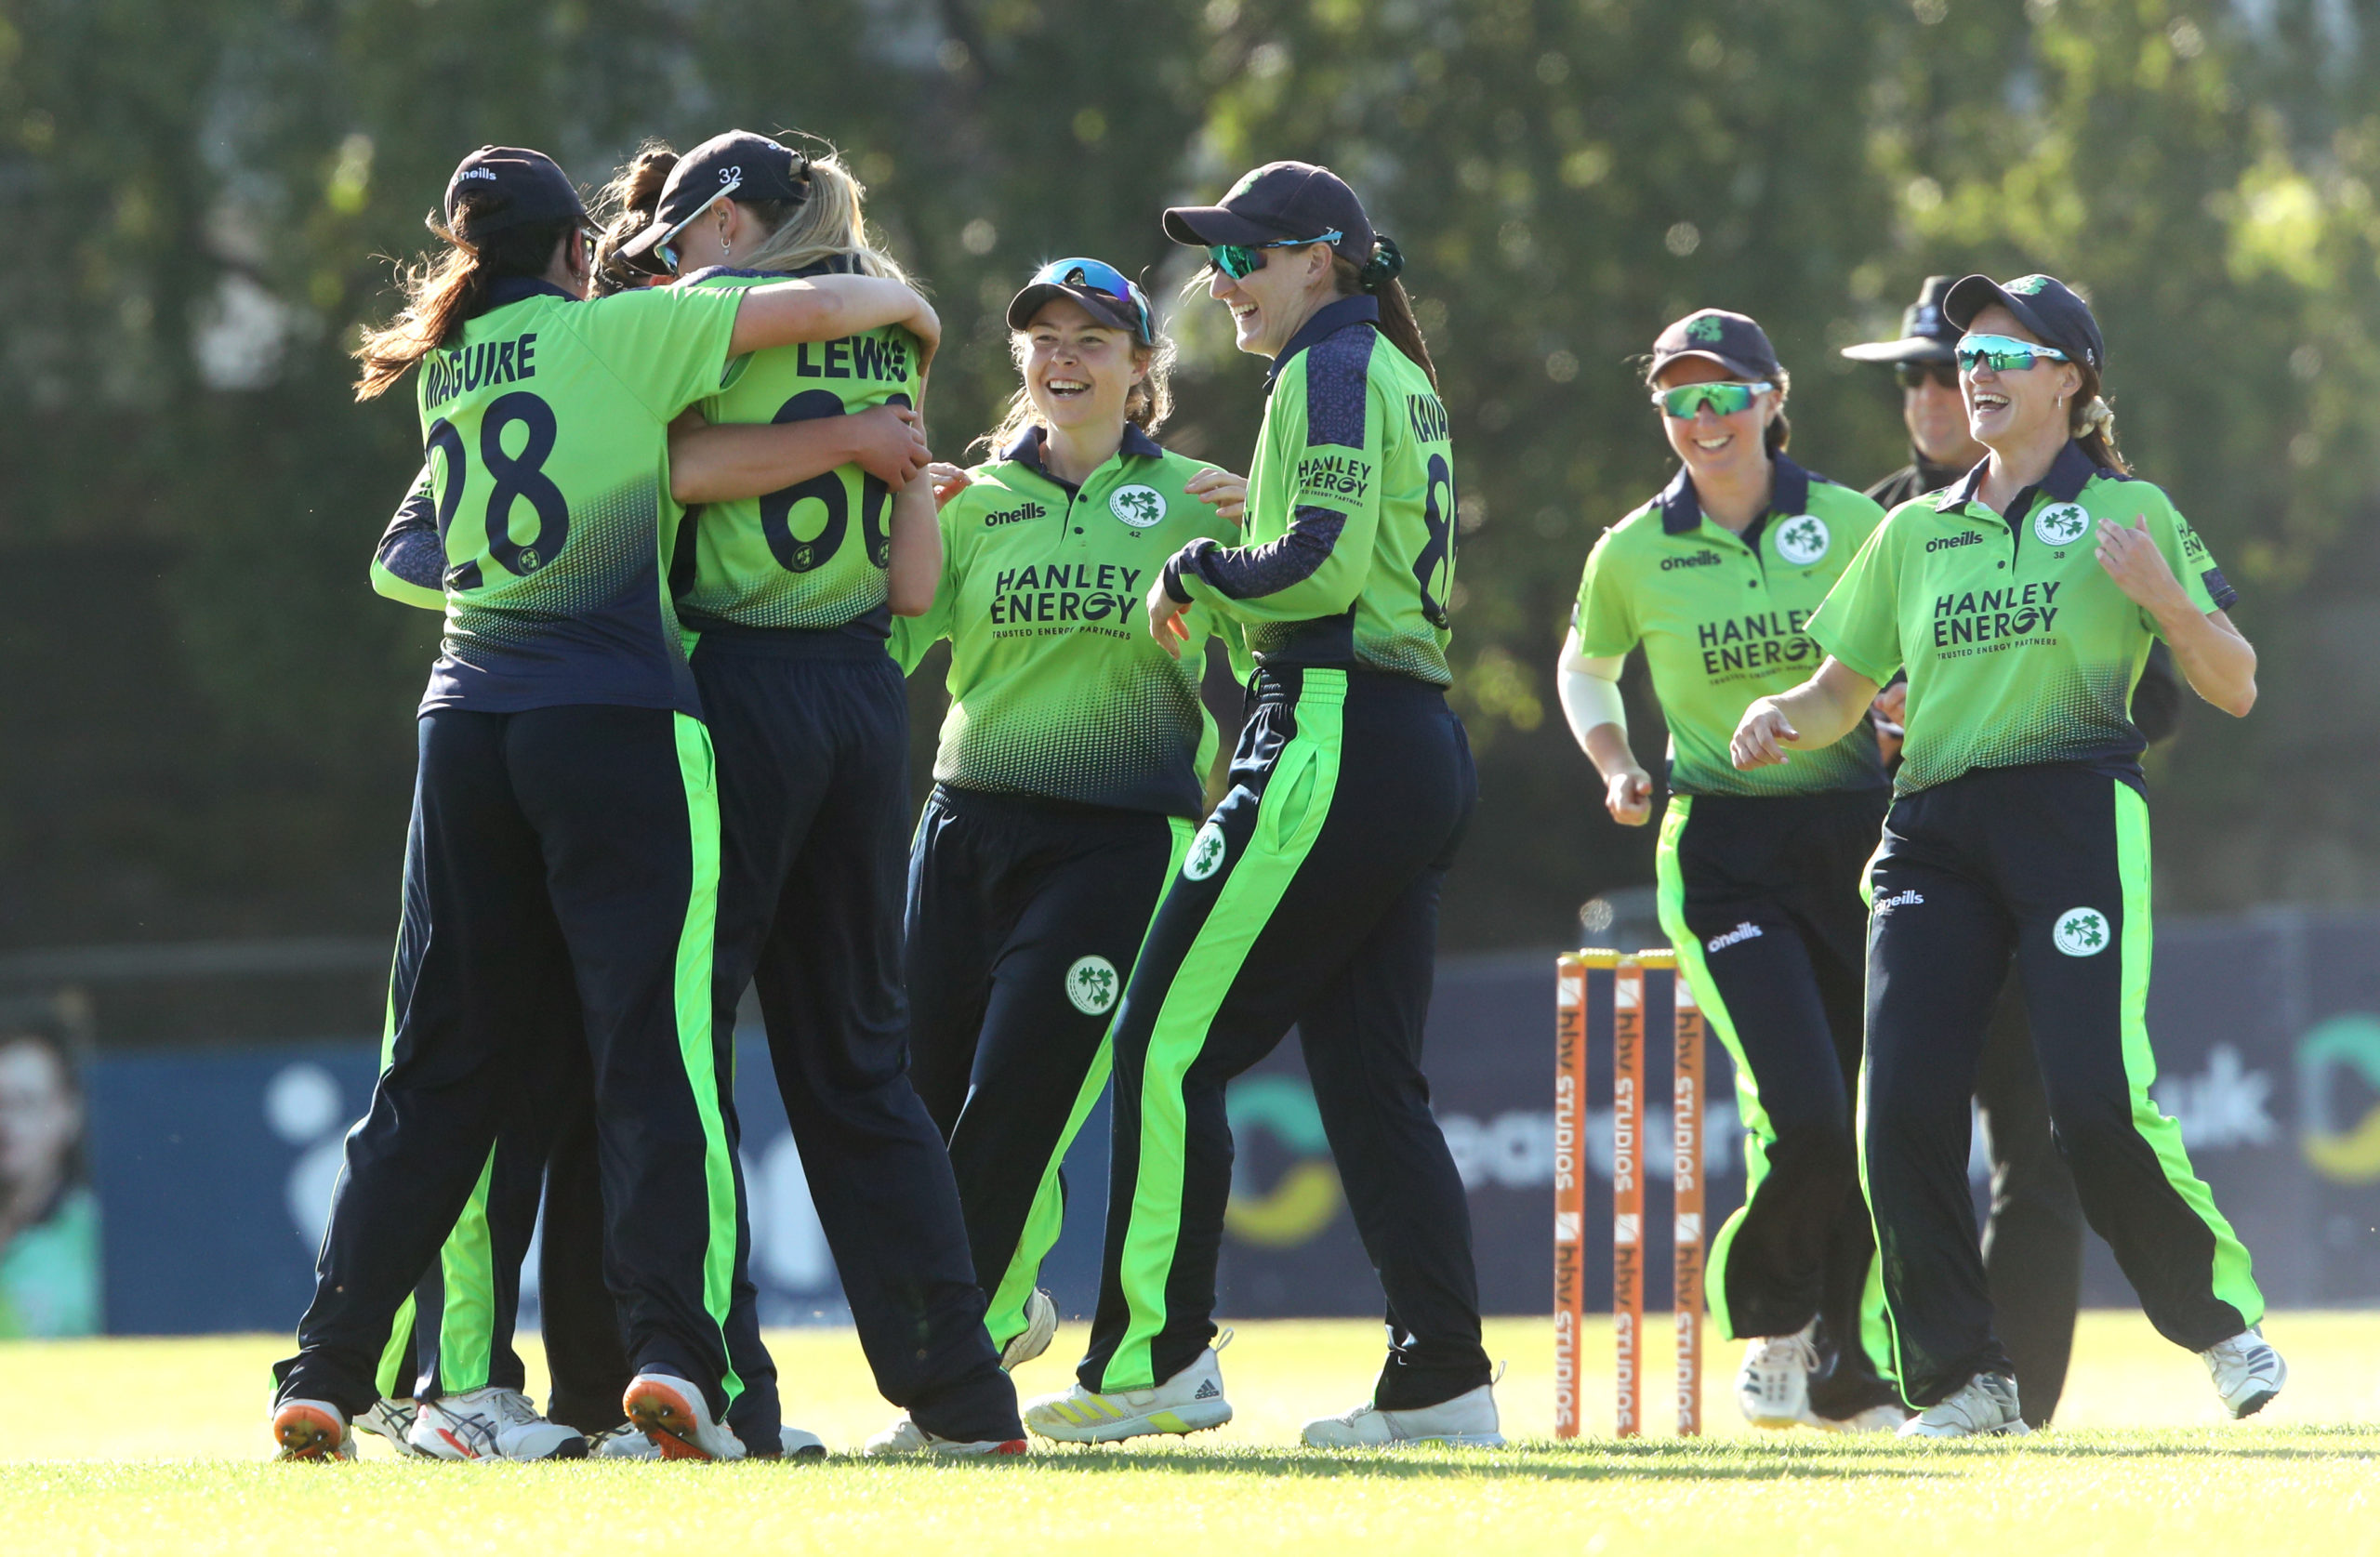 Cricket Ireland: All you need to know - Ireland Women at the ICC T20 World Cup Qualifier